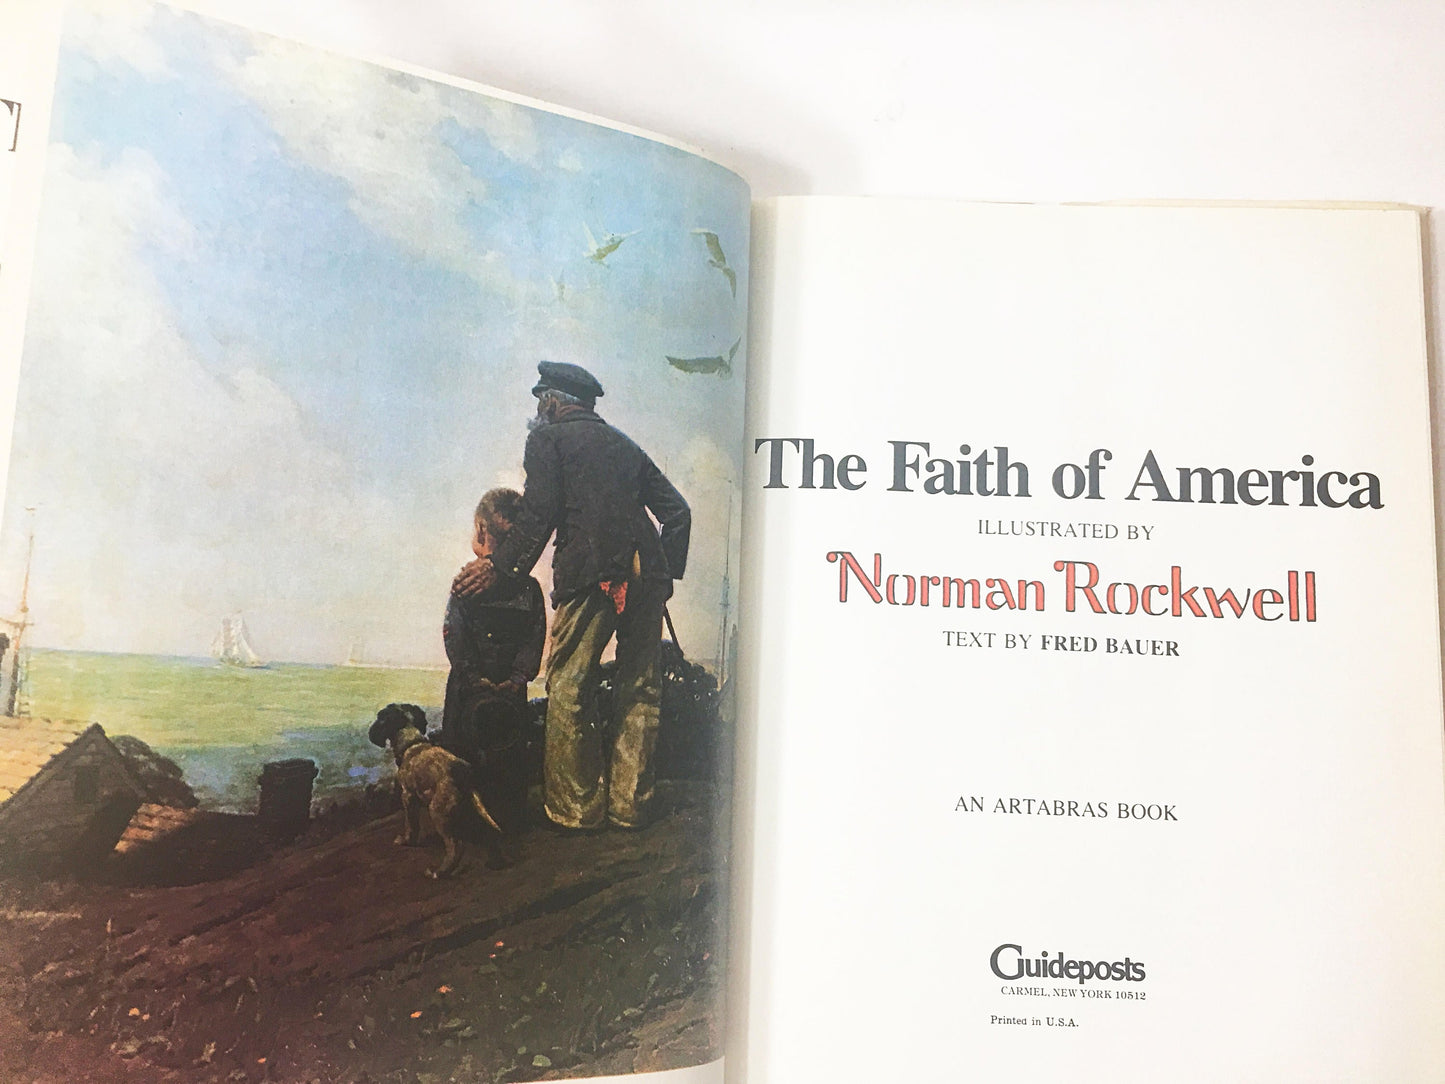 The Faith of America. Norman Rockwell. Christian religious book. Christmas gift. Saturday Evening Post. American families. White book decor.